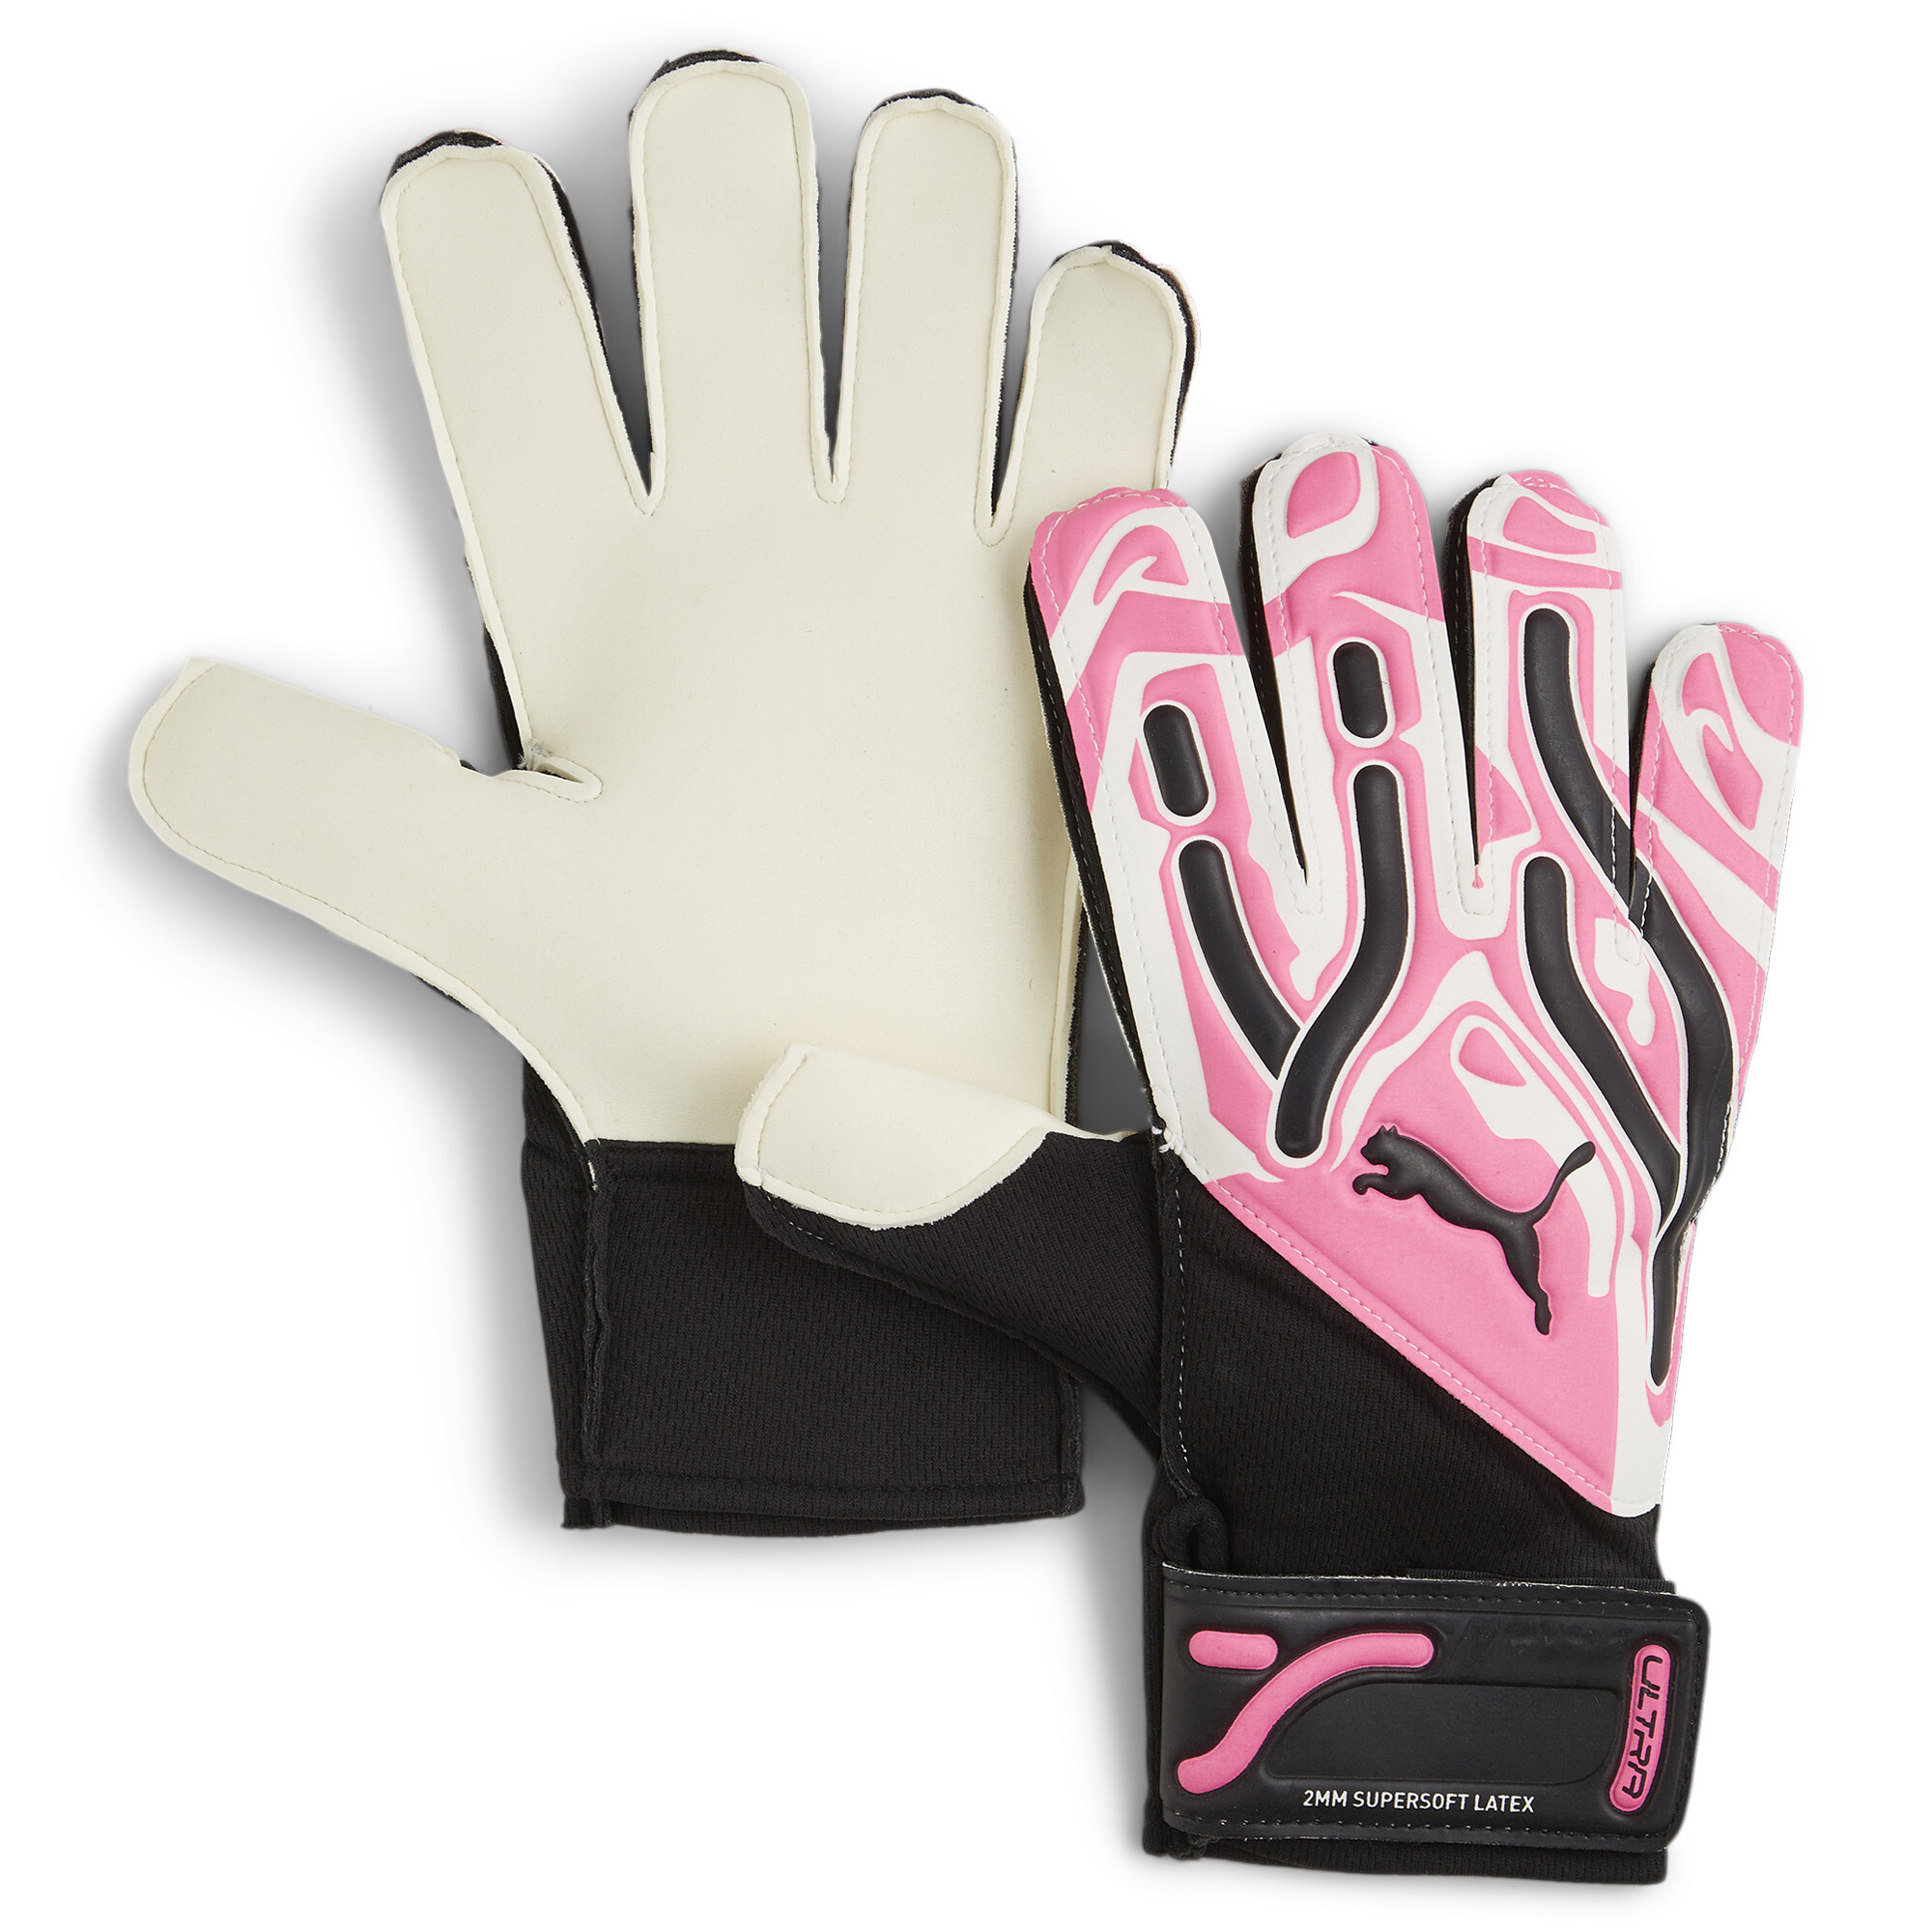 Men's PUMA ULTRA Play RC Goalkeeper Gloves In Pink, Size UK 6